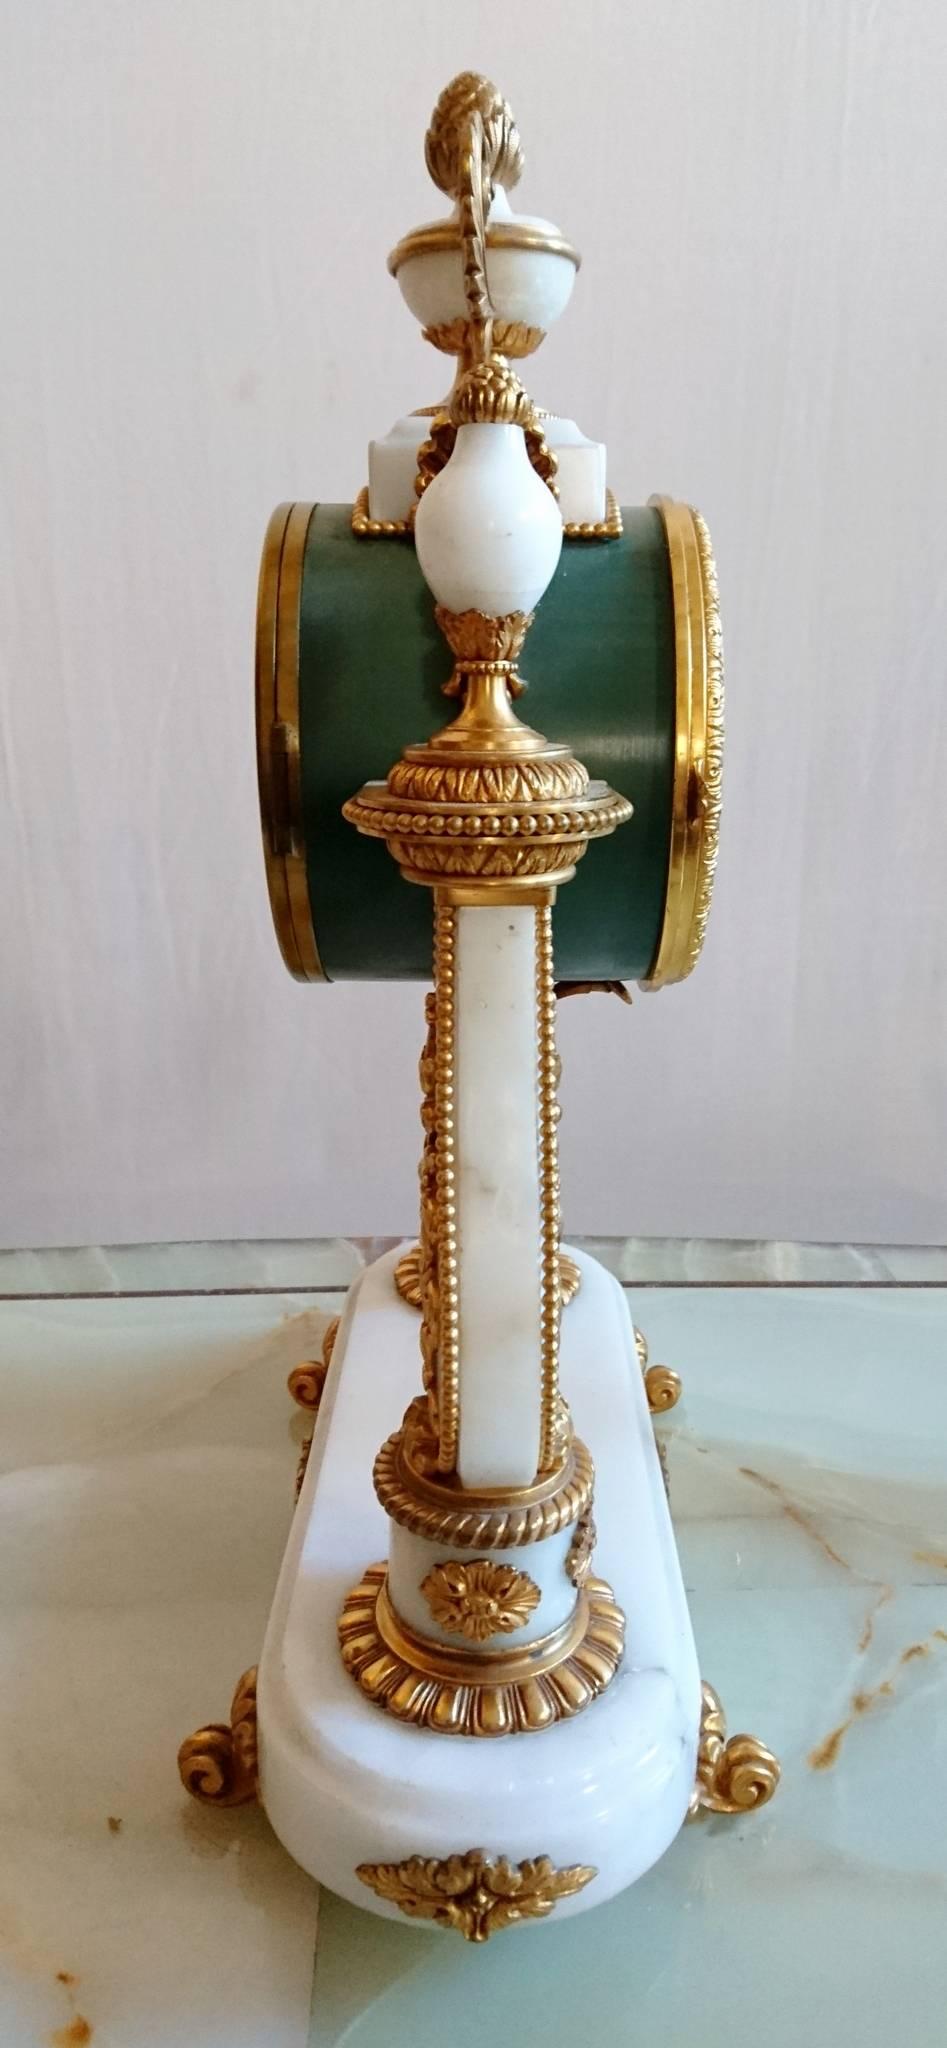 20th Century French Ormolu and White Marble Mantle Clock and Candelabra Garniture